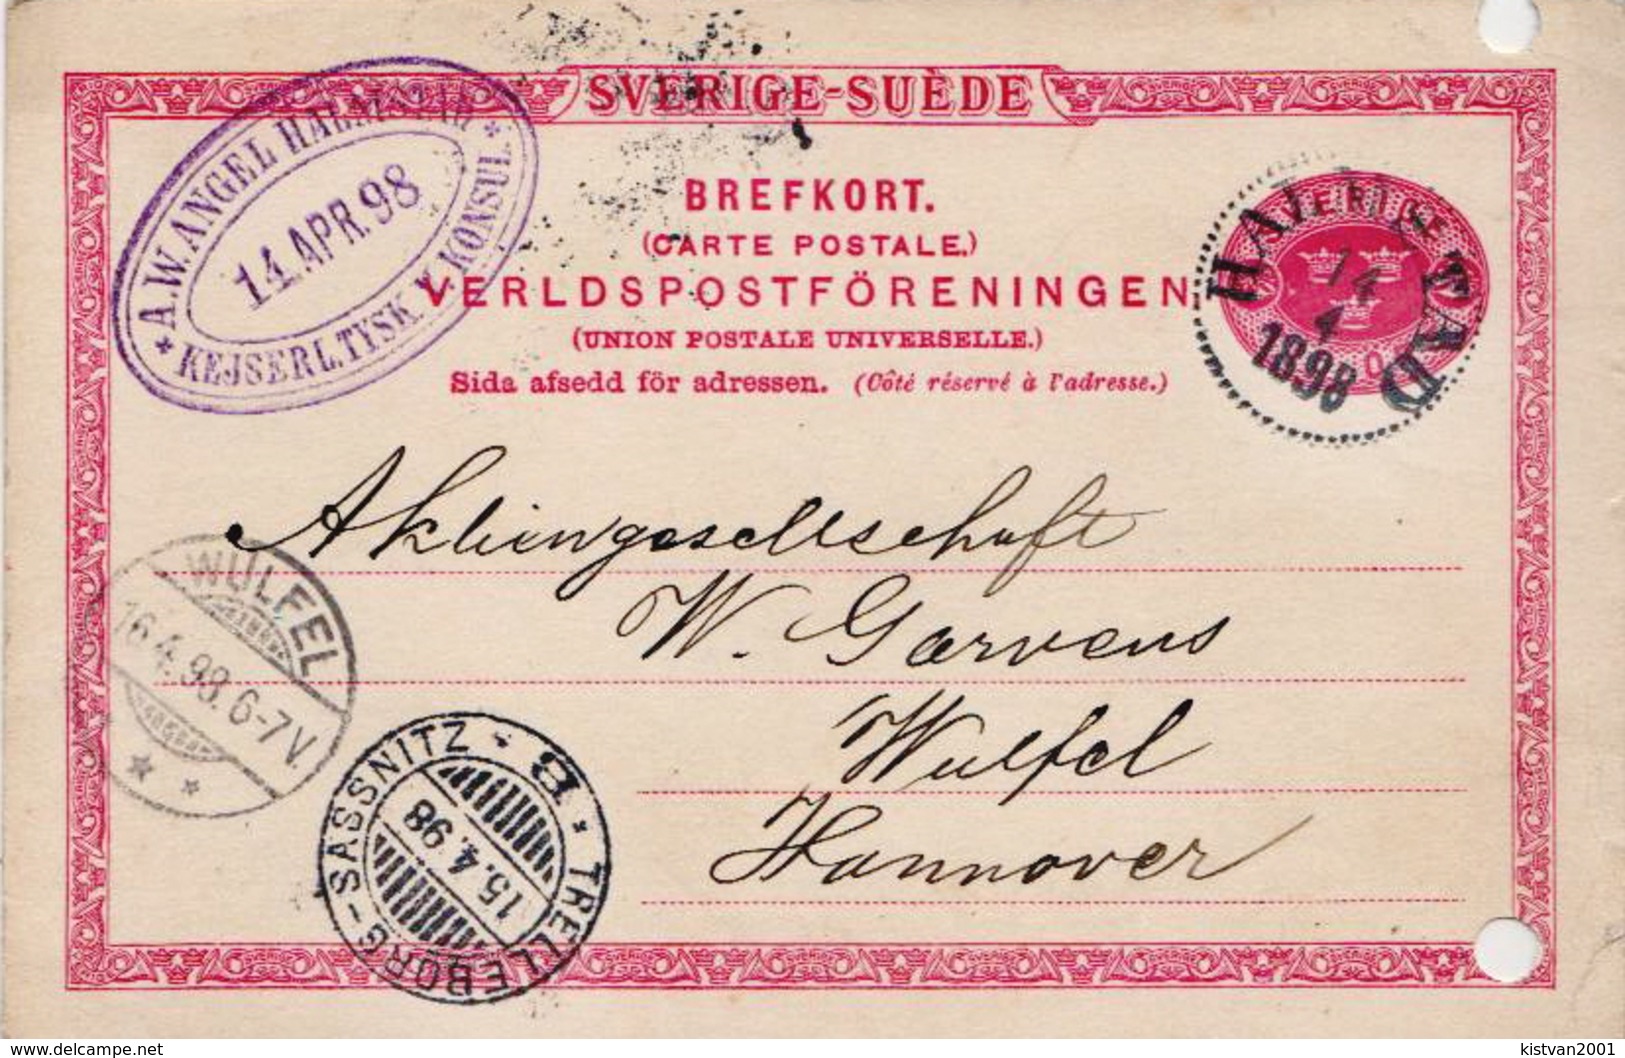 Postal History: Sweden Postal Stationery Card - Covers & Documents